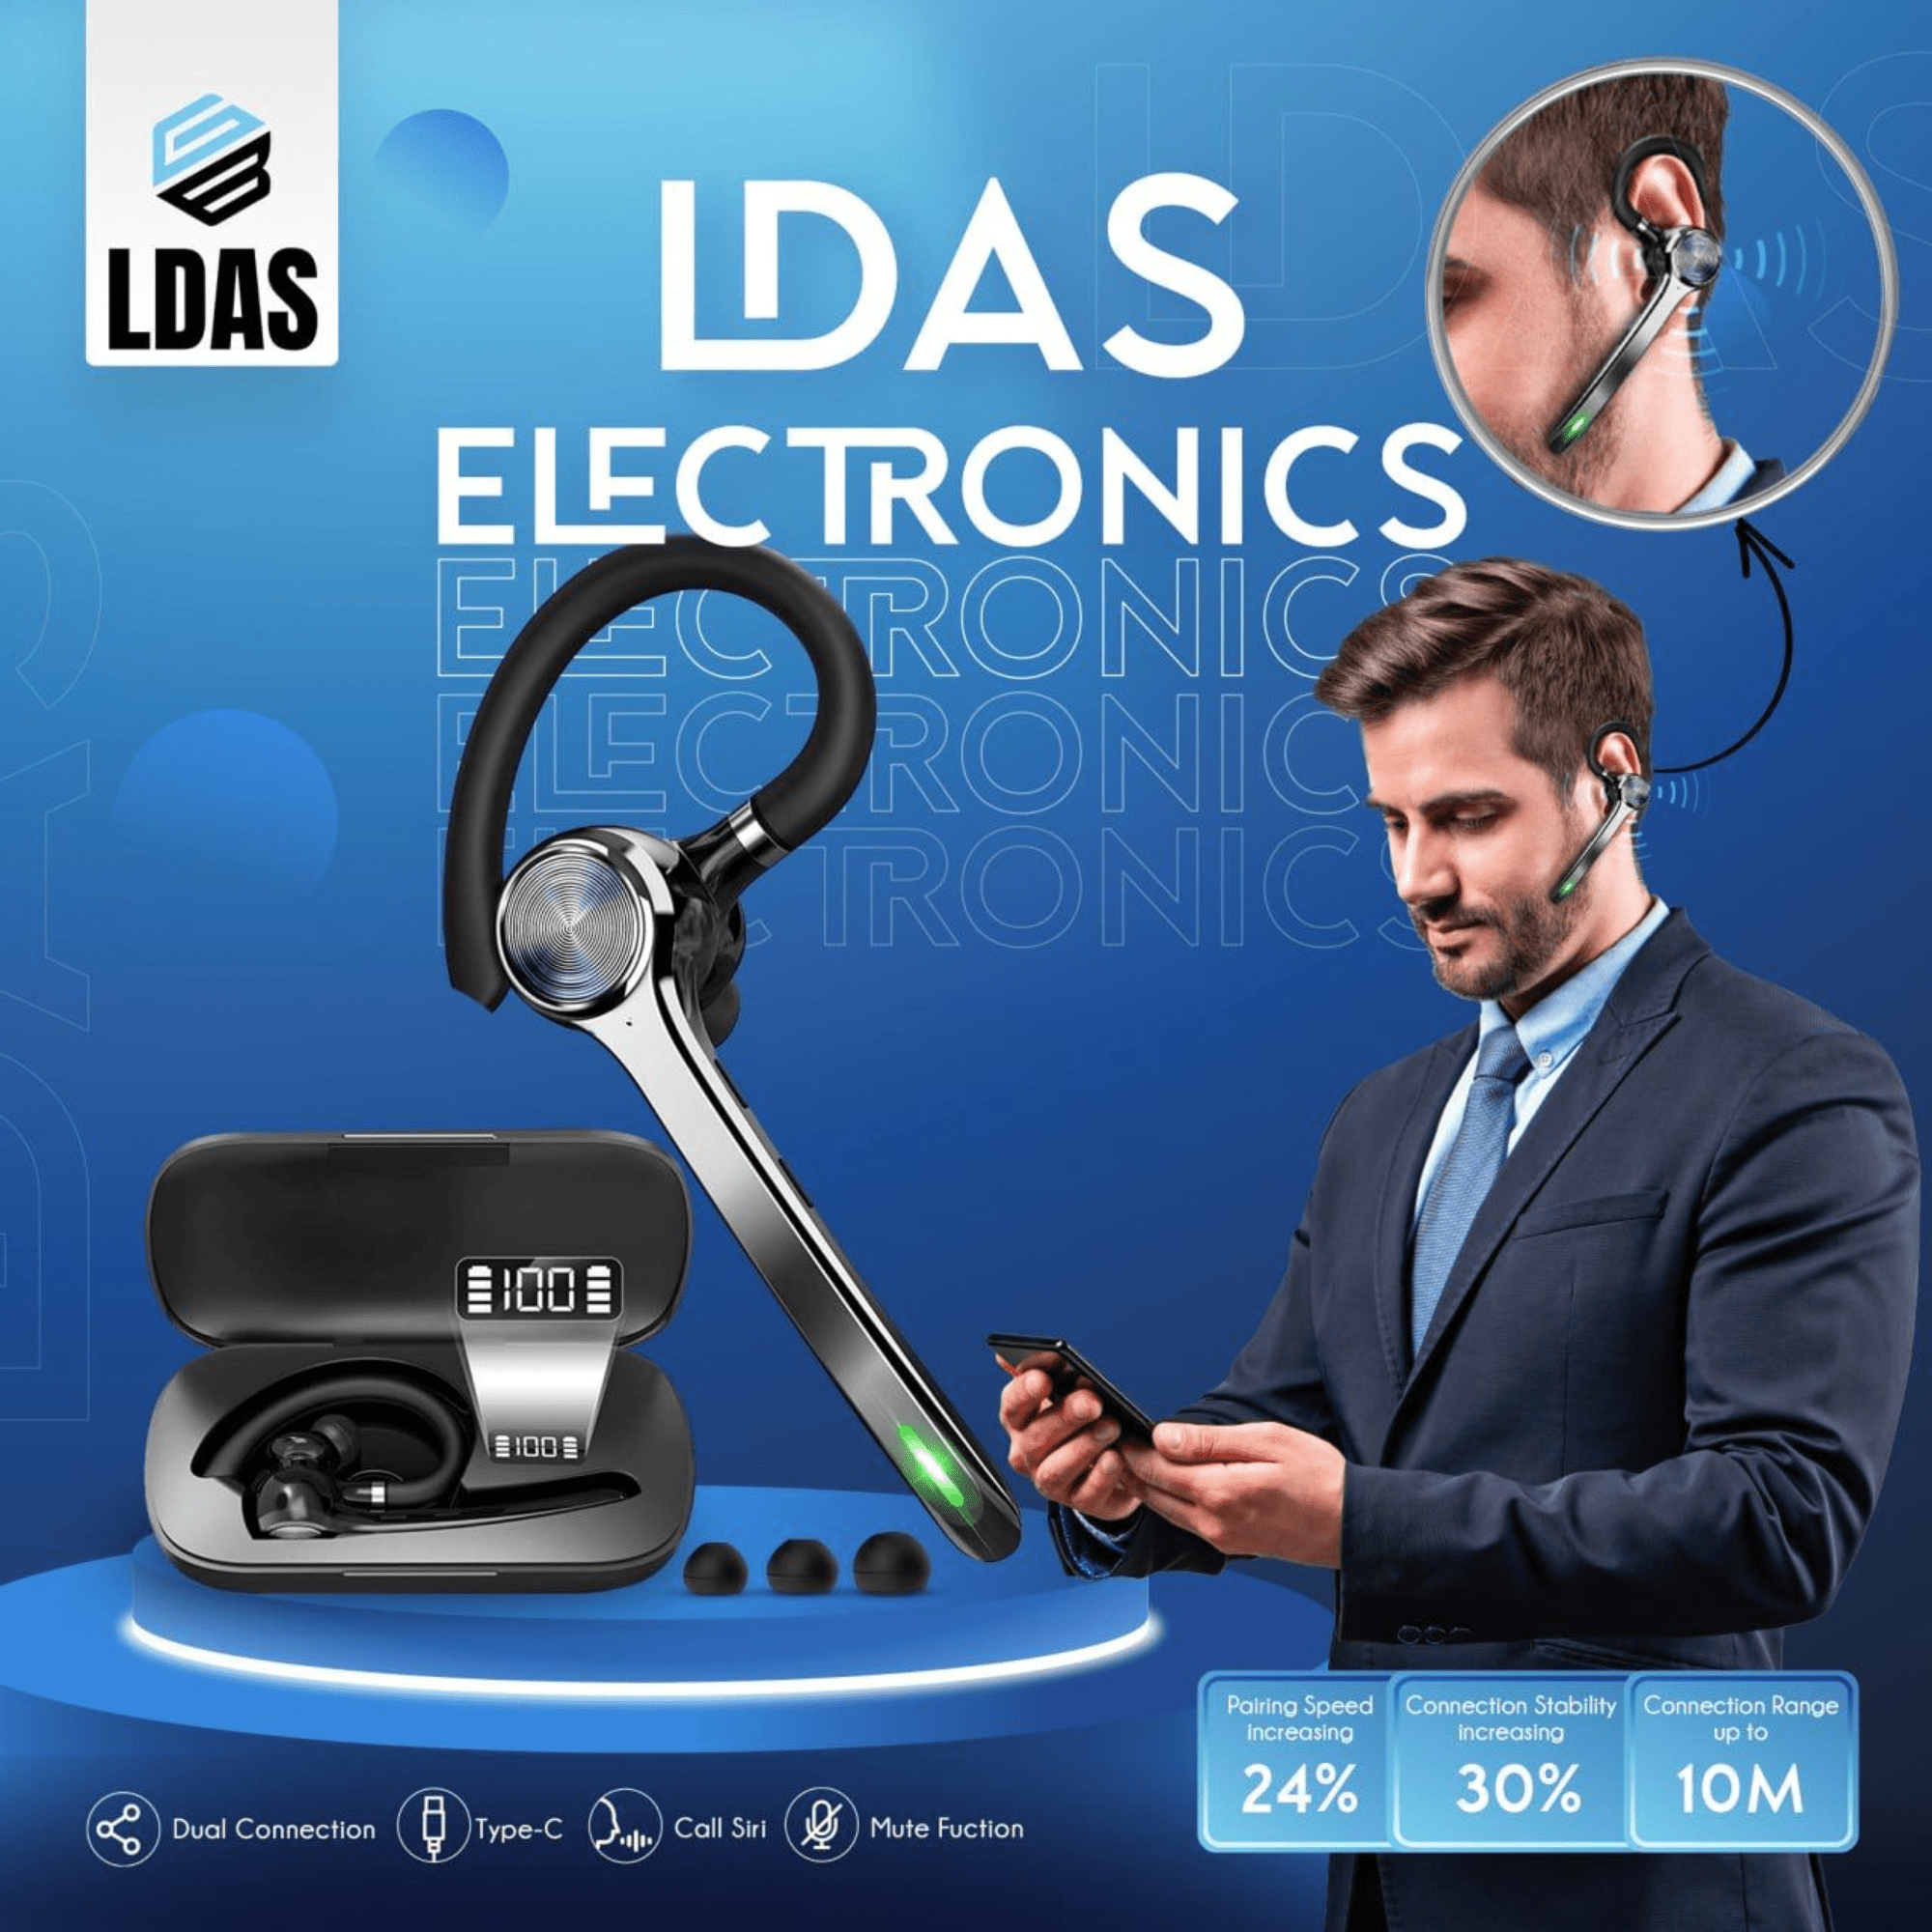 Noise Cancellation: Uncover the Surprisingly Strong Benefits of the LDAS G7 - LDAS ELECTRONICS